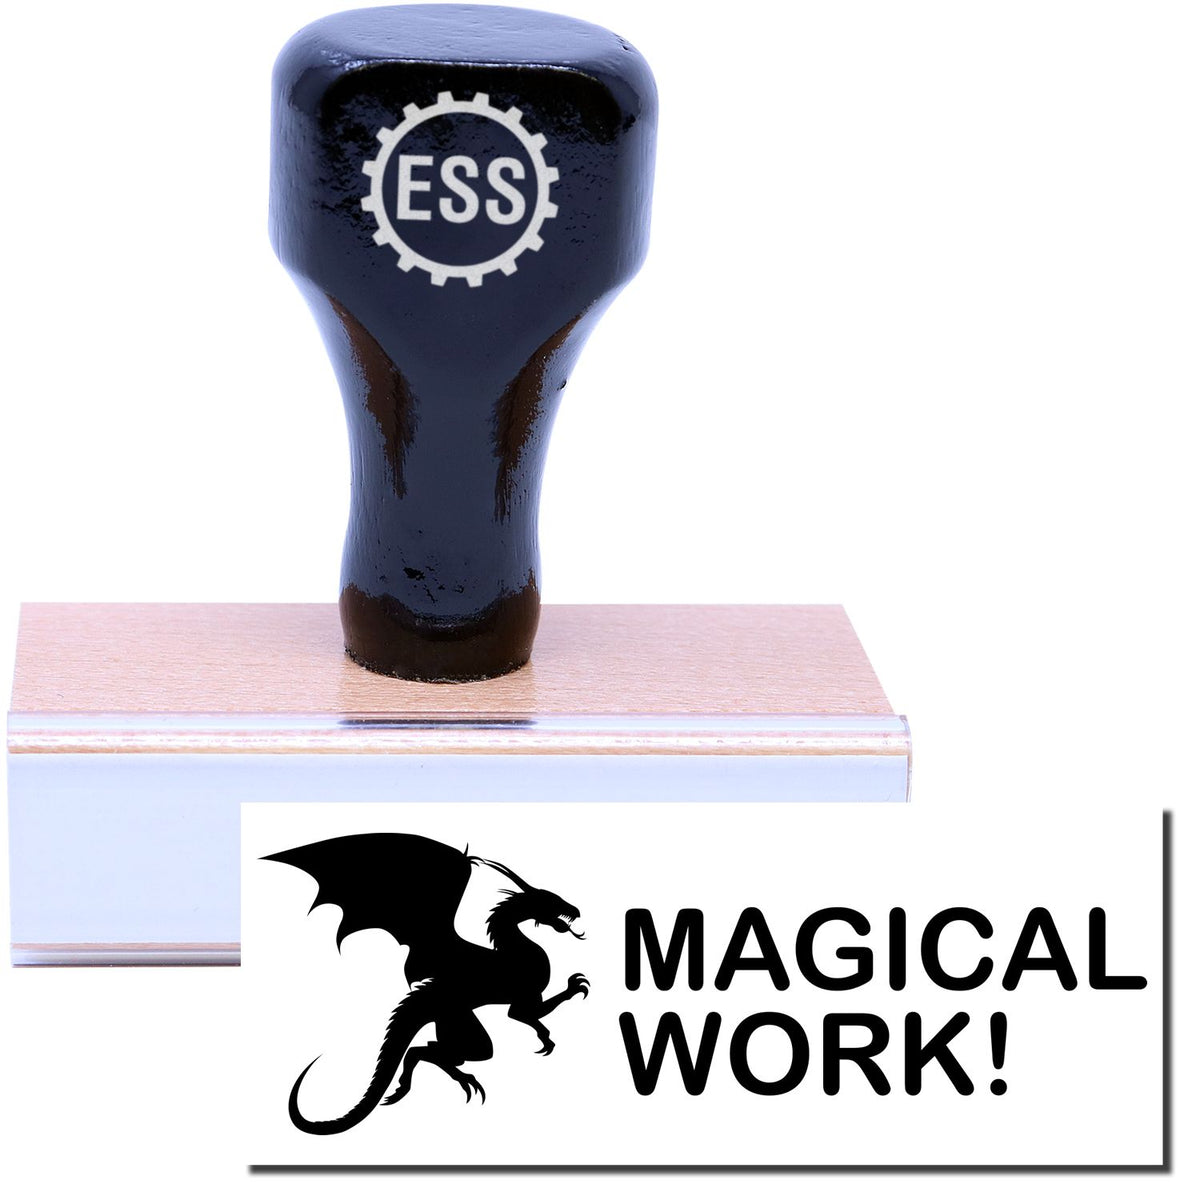 A stock office rubber stamp with a stamped image showing how the text &quot;MAGICAL WORK!&quot; in large font with an iconic dragon design is displayed after stamping.